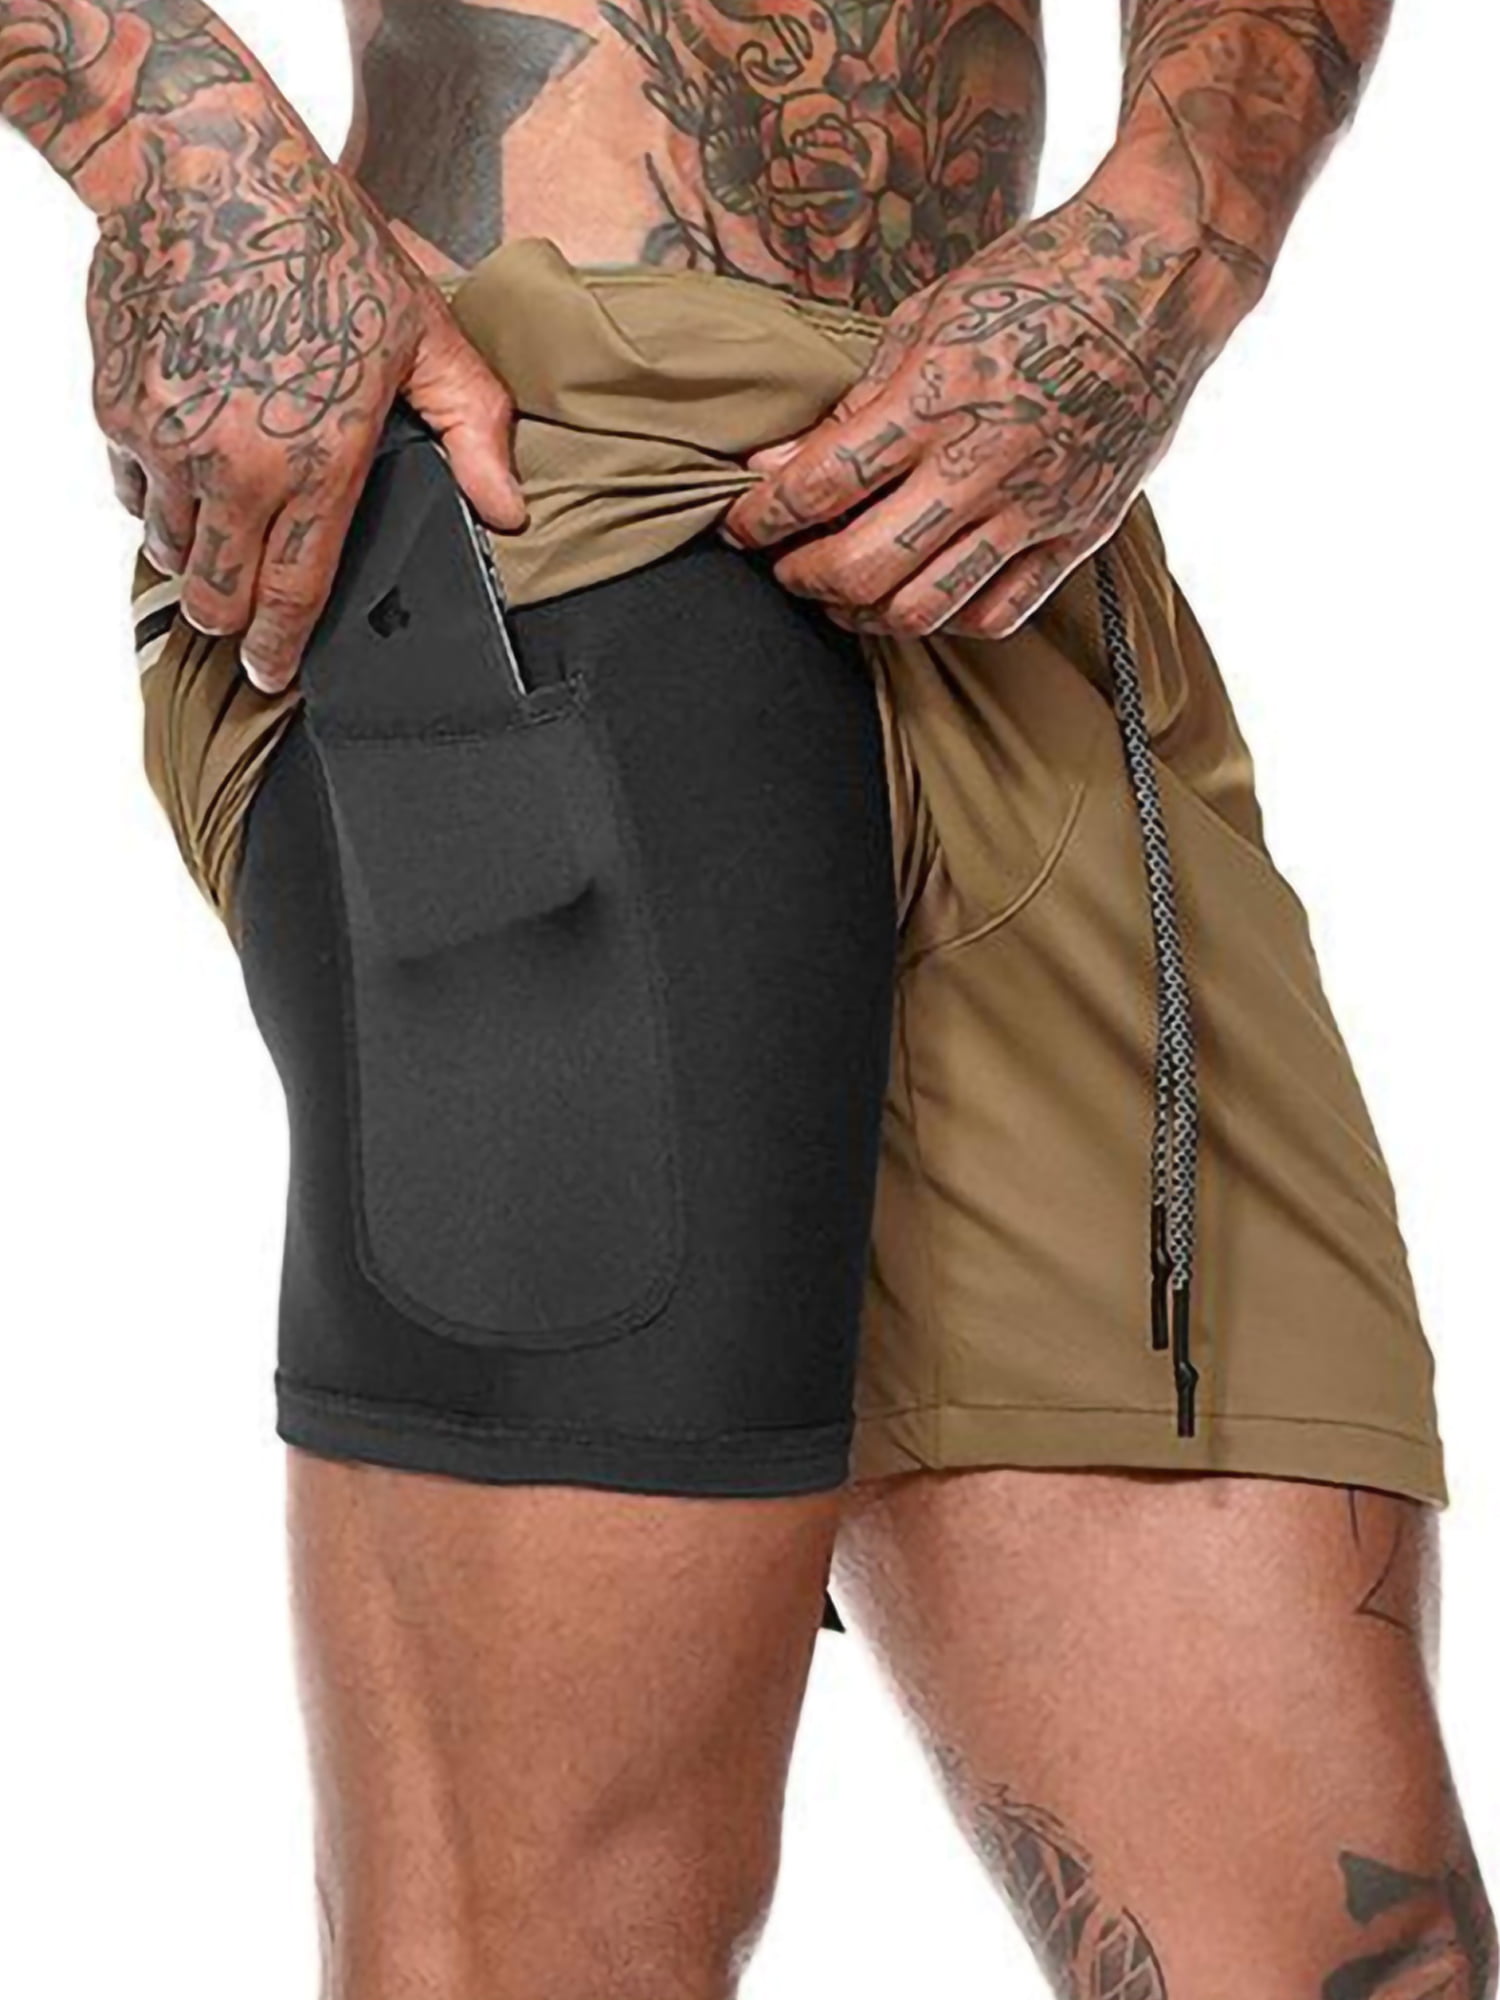 HIBETY Mens 7 Workout Running Shorts with Zipper Pocket Quick Dry Gym Athletic Shorts Lightweight